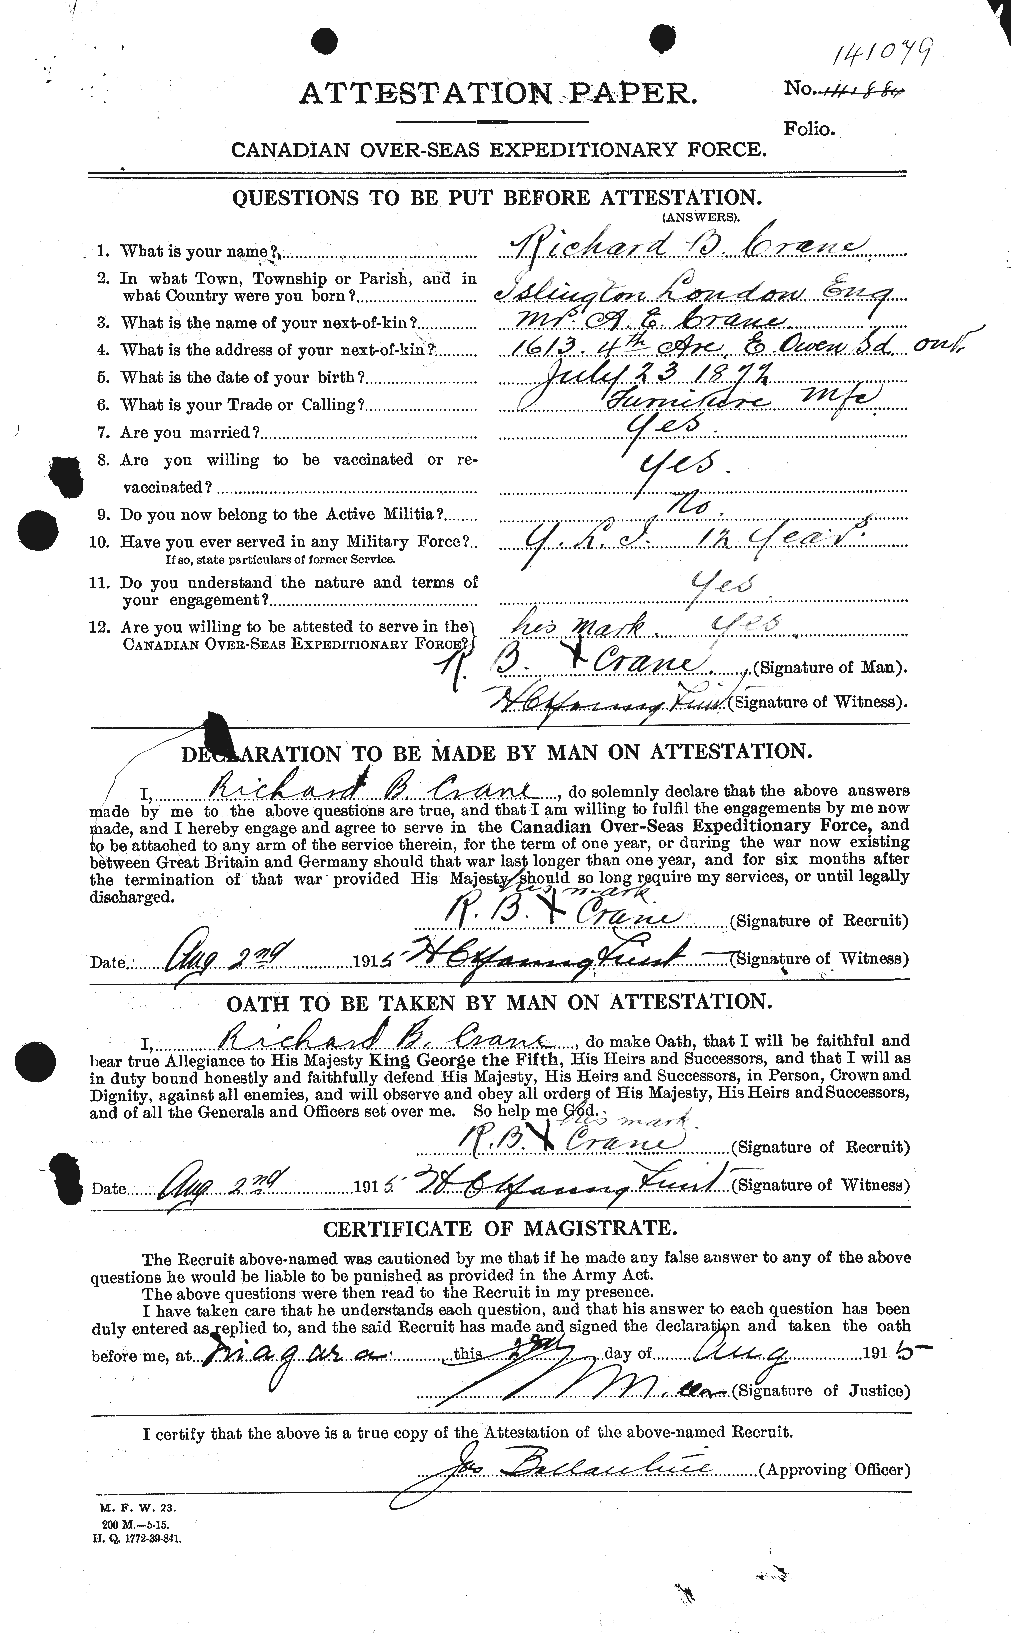 Personnel Records of the First World War - CEF 061756a